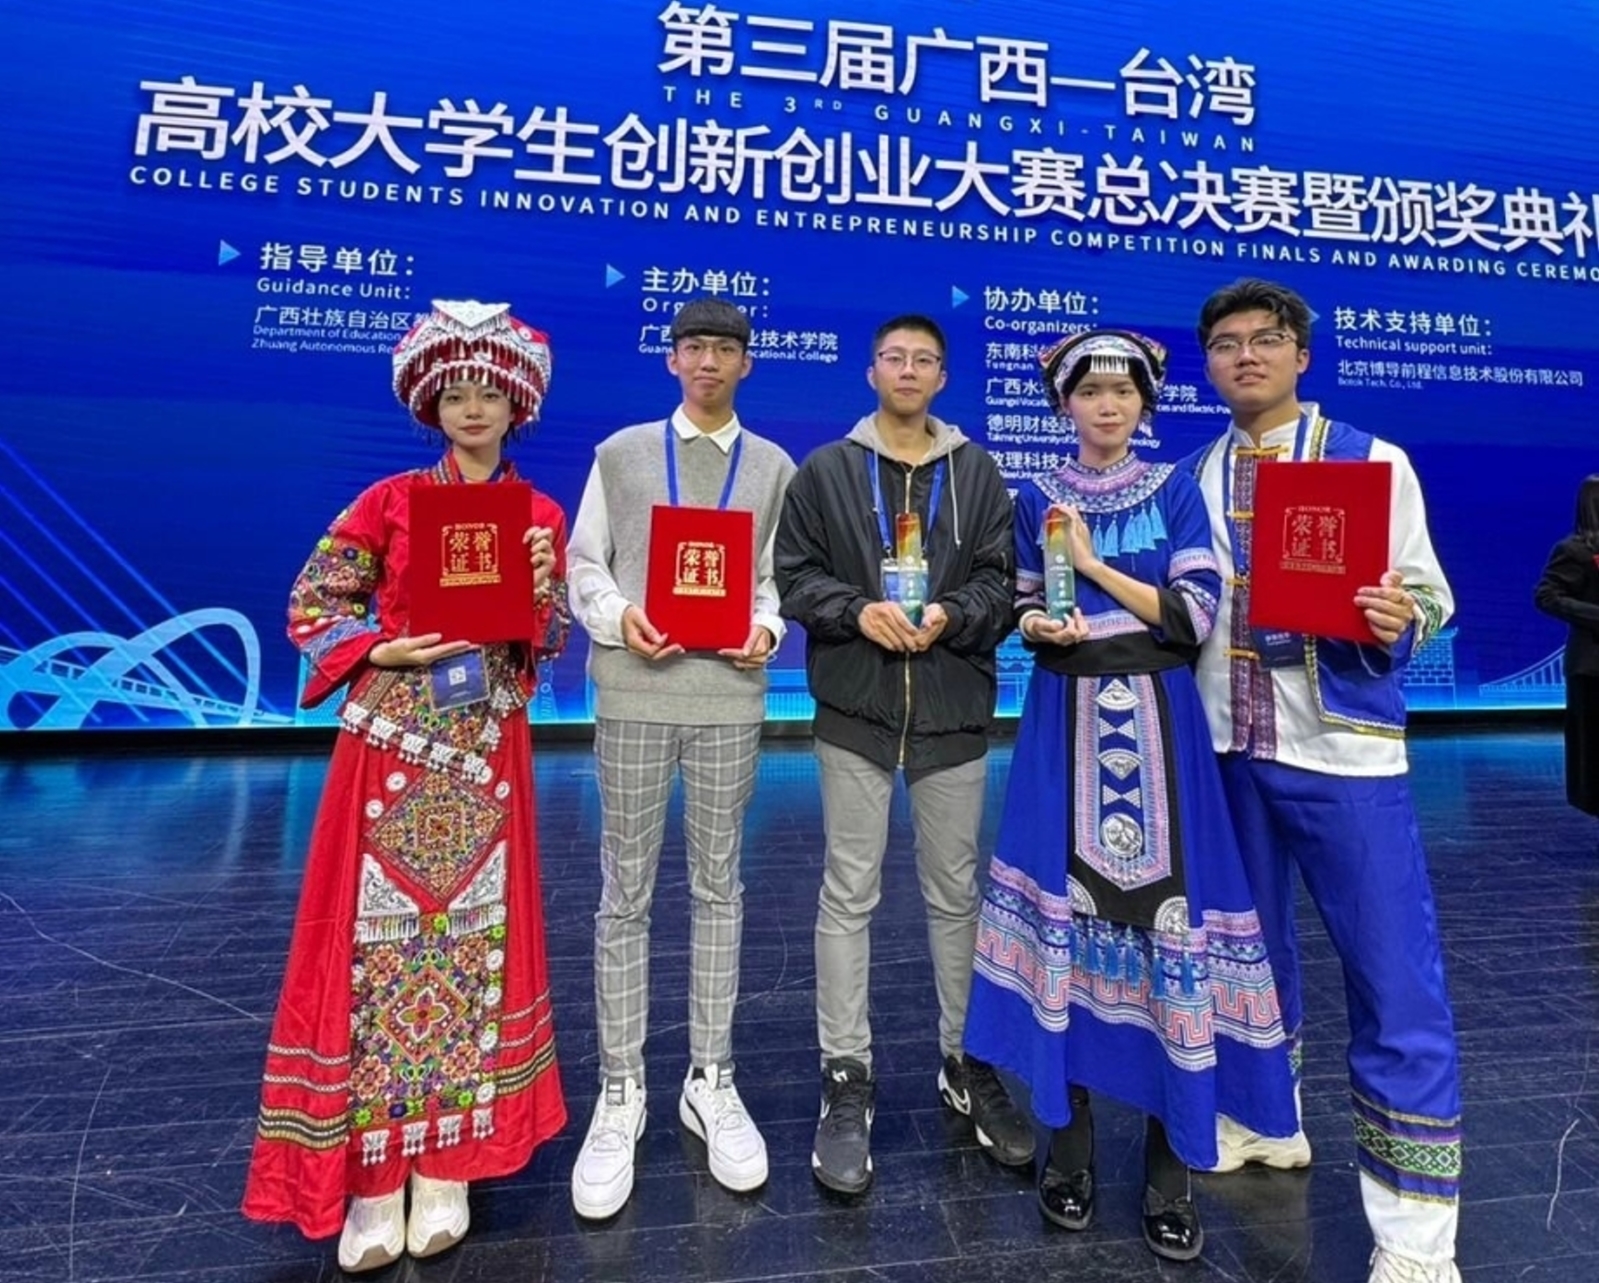 The GaiaBit Team from the Department of Information Network Engineering at Lunghwa University of Science and Technology won ther first Prize at the Guangxi-Taiwan College Students Entrepreneurship Competition.